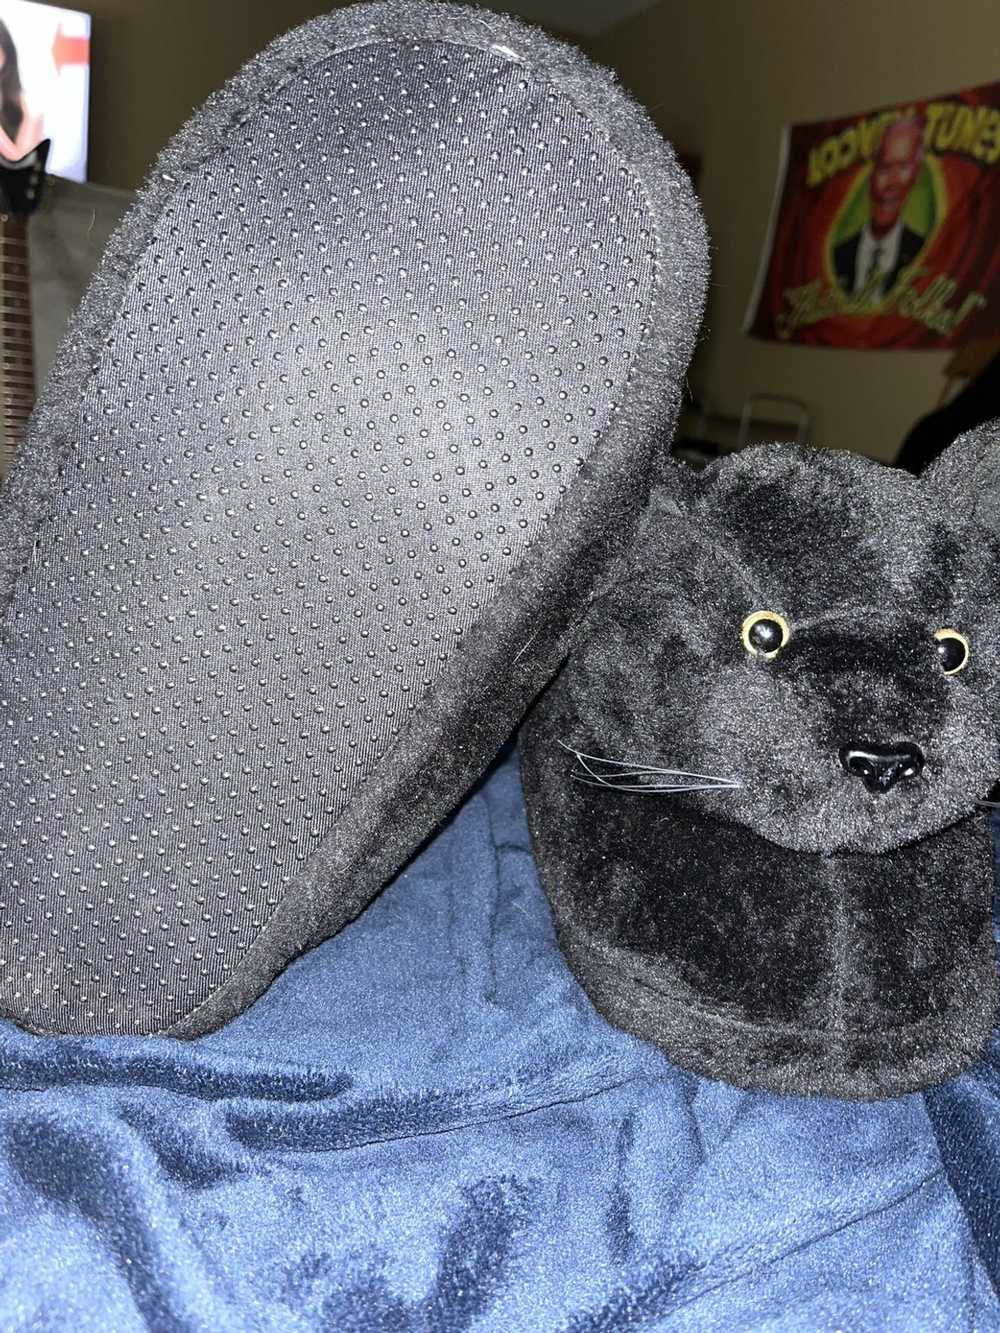 Other Kitty slippers - image 1